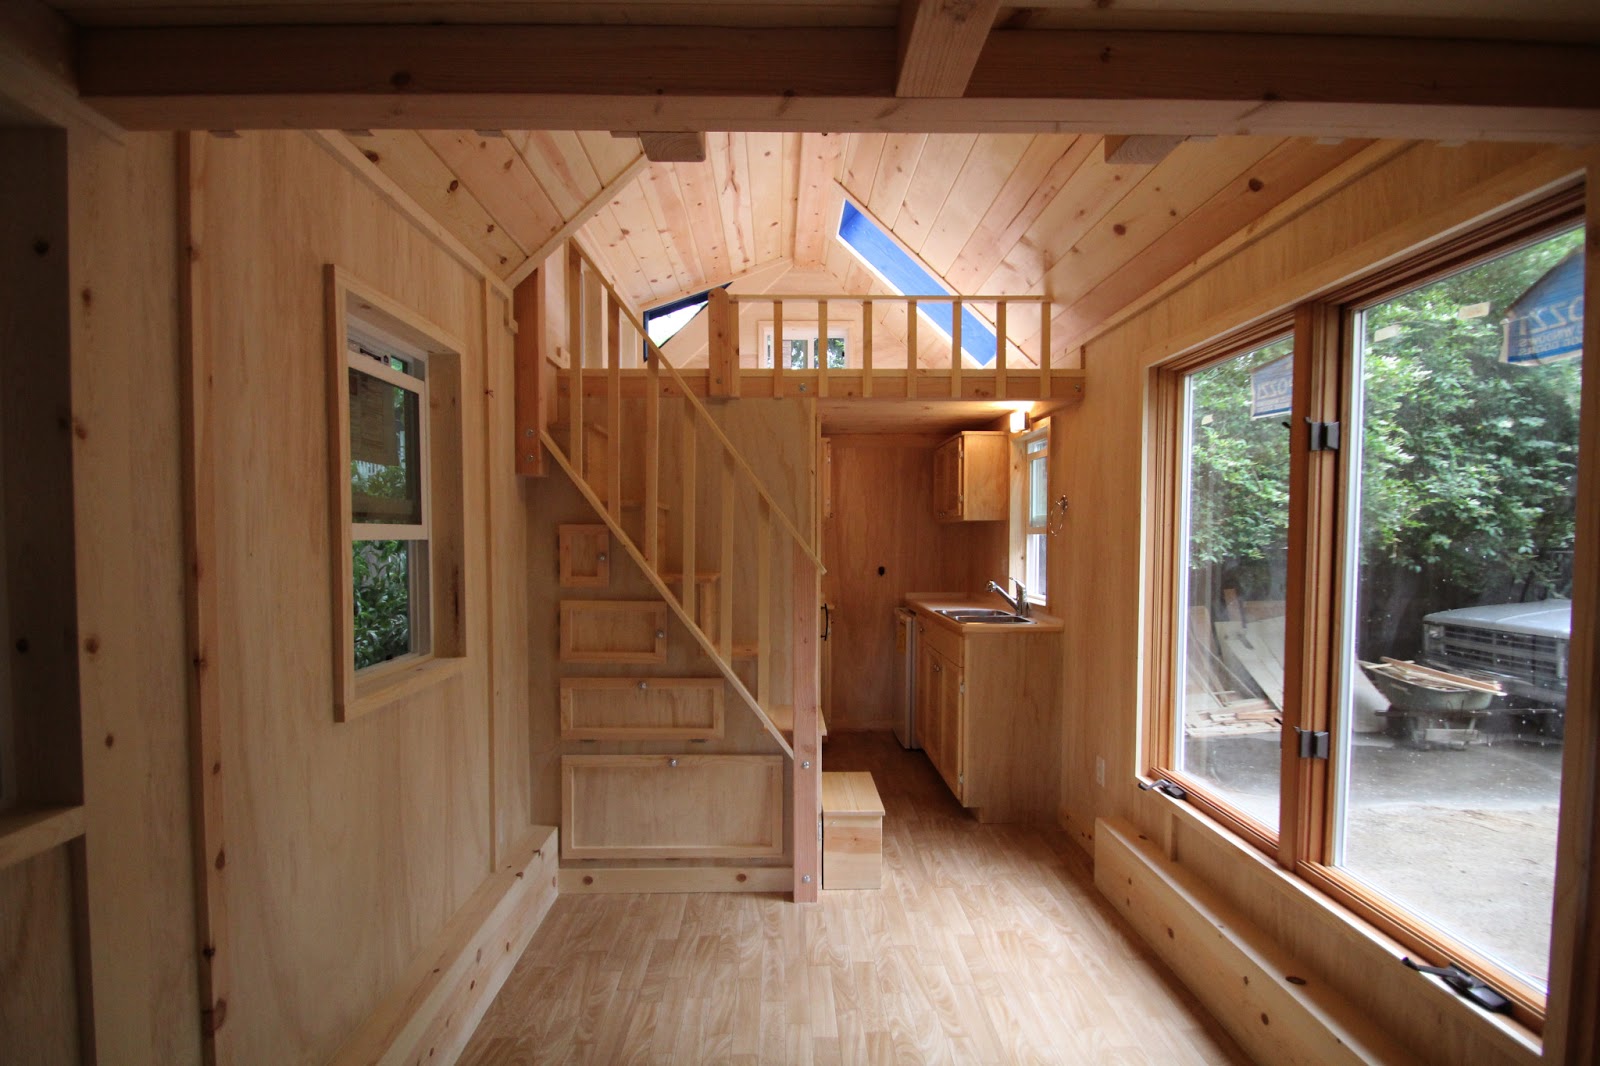 Selling tiny houses? : TinyHouses